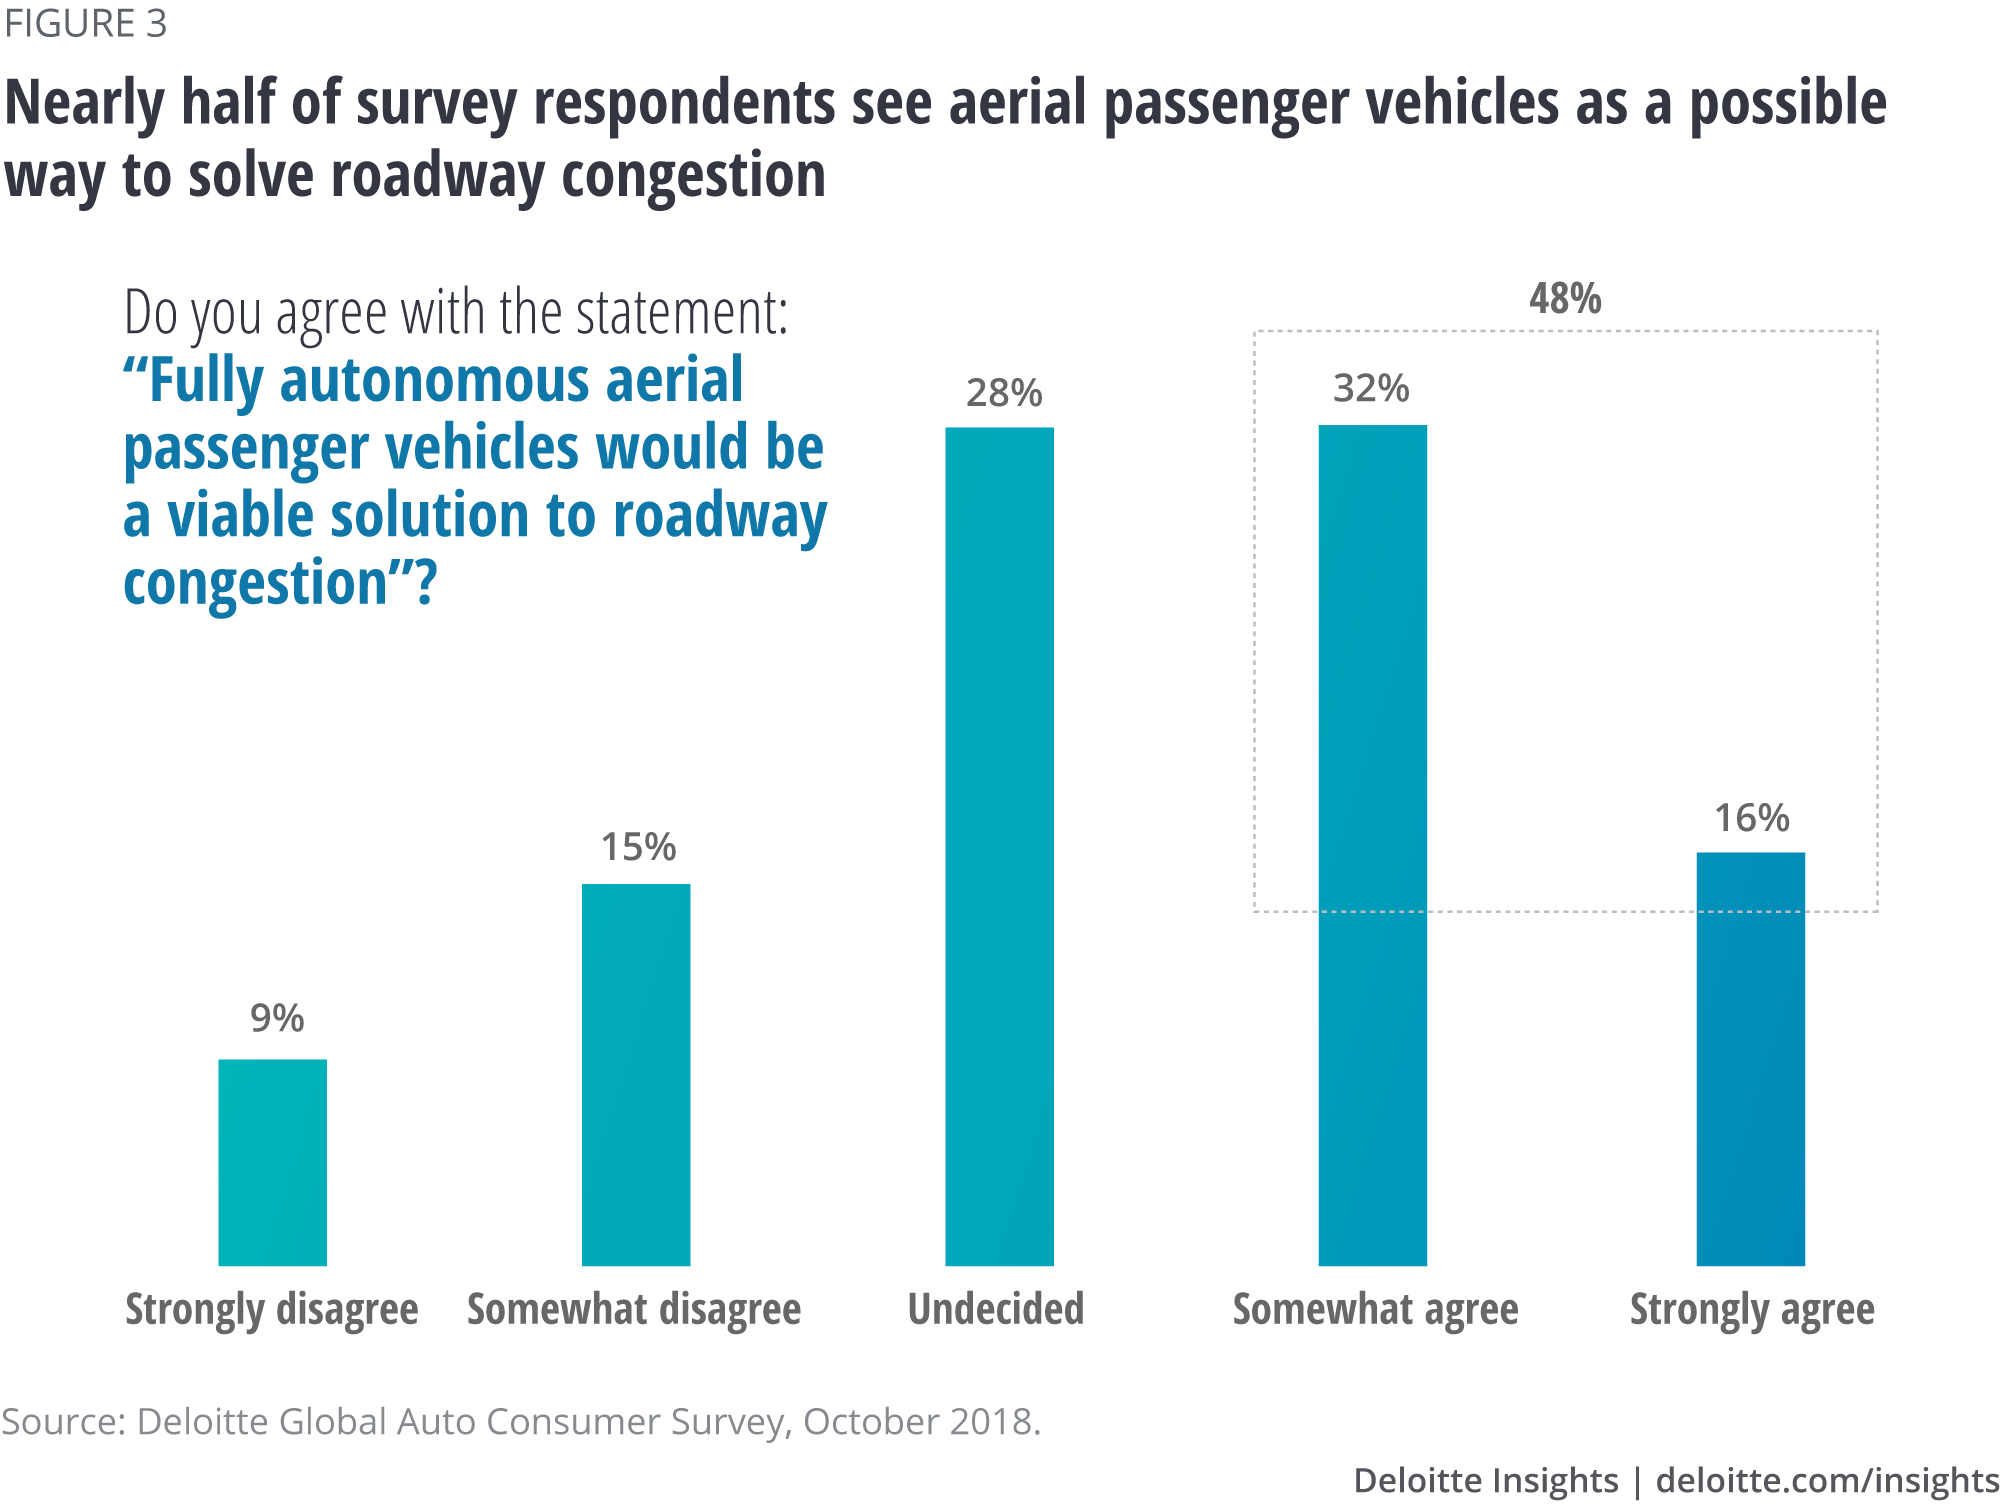 Nearly half of survey respondents see aerial passenger vehicles as a possible way to solve roadway congestion